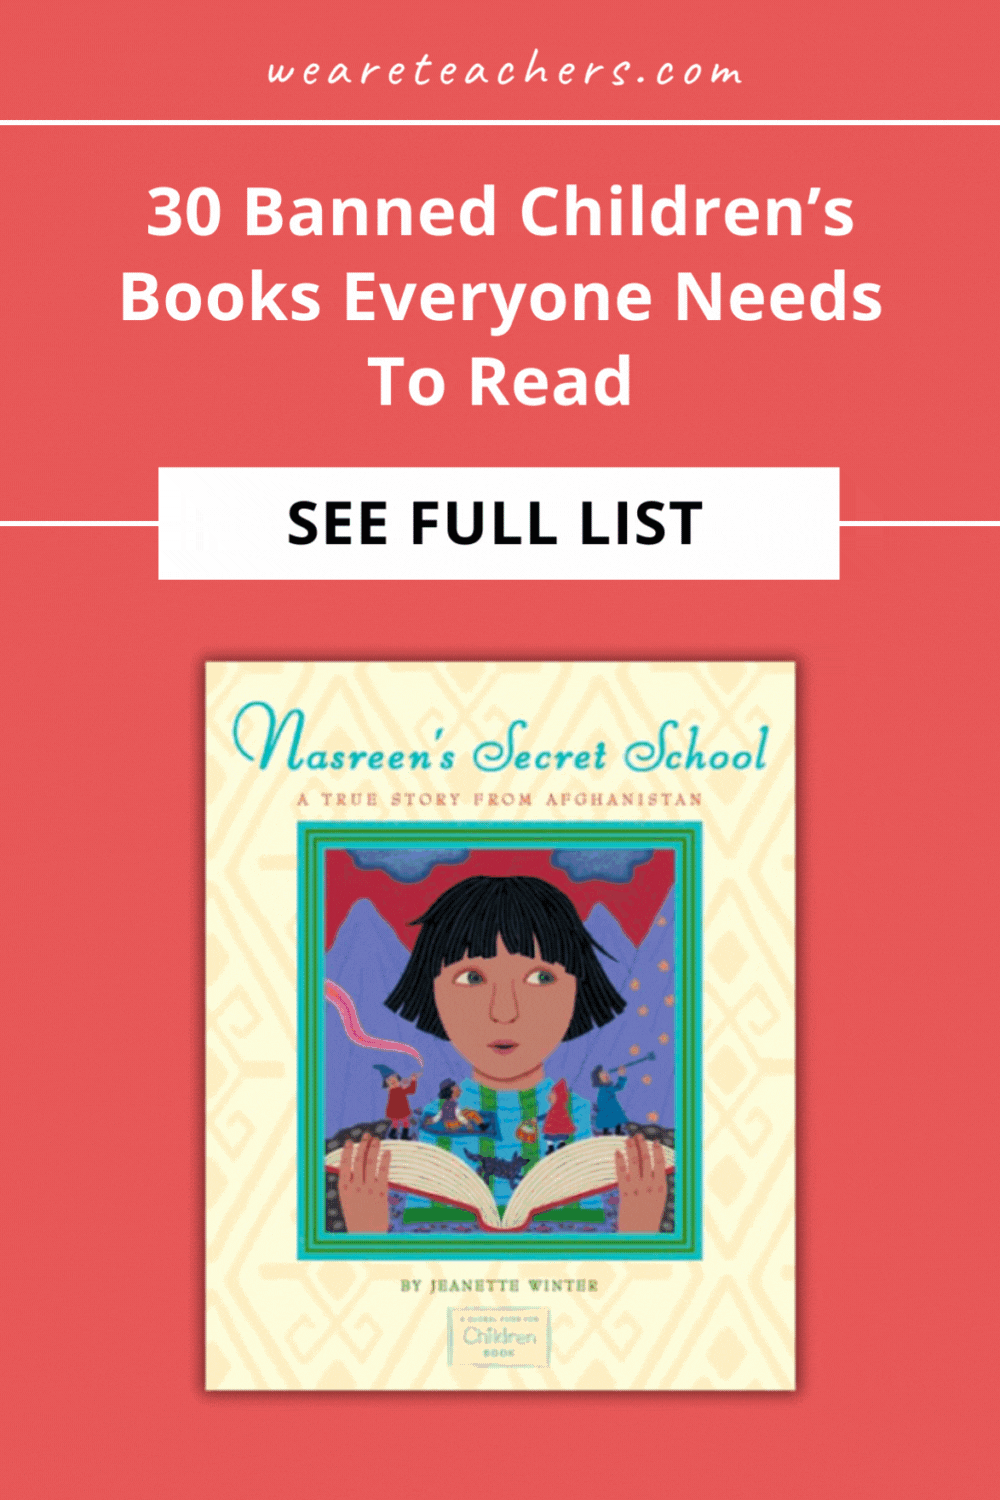 The number of challenged and banned children's books grows each year. All kids need access to these titles.